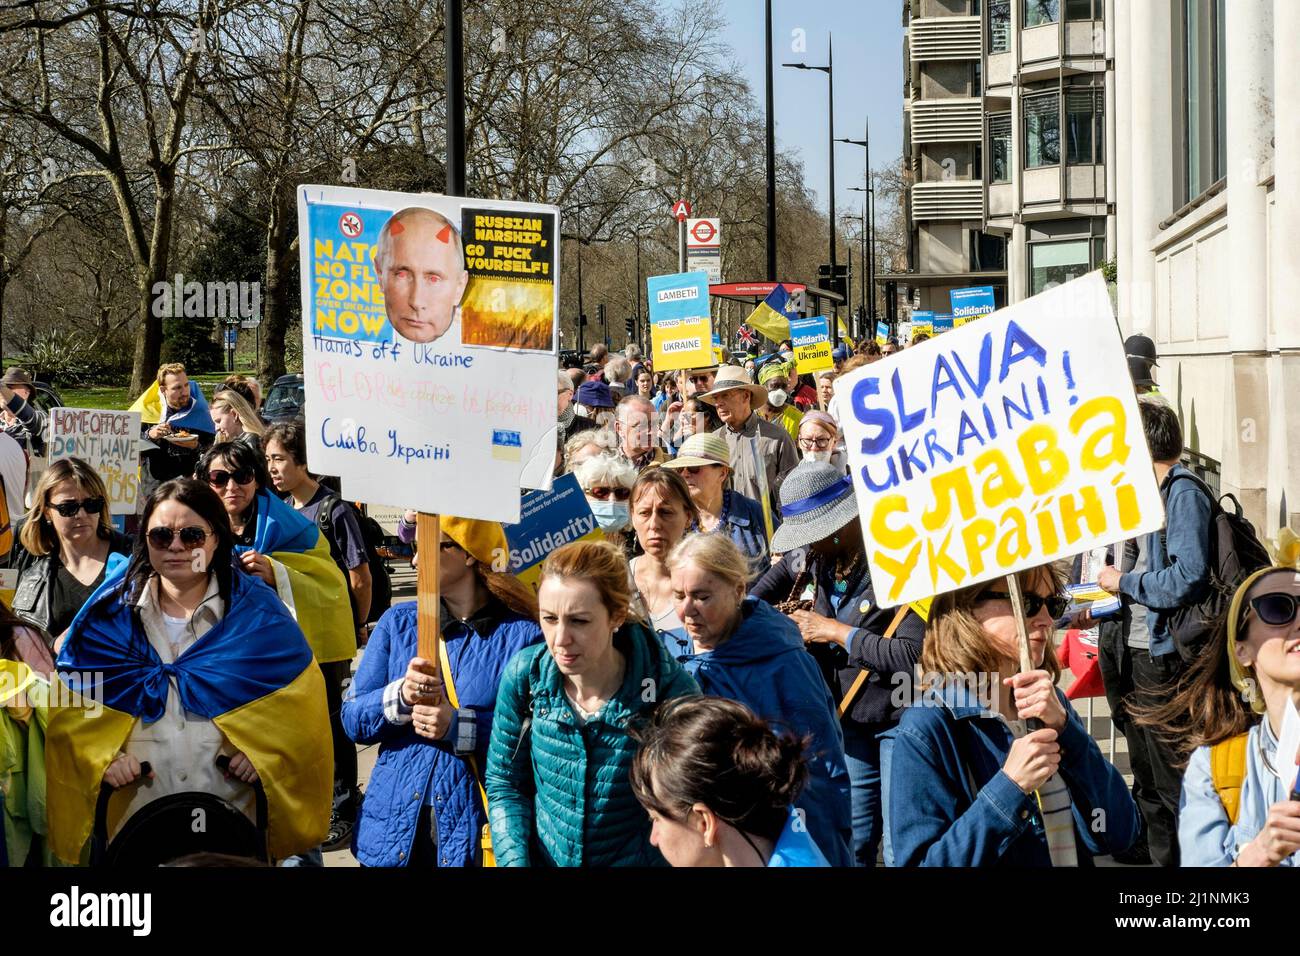 London UK, 26th March 2022. Thousands of people join a Stand with Ukraine march  and vigil in central London in protest against the Russian invasion. The march begins on Park Lane, an area with some of  London's most expensive properties. Stock Photo